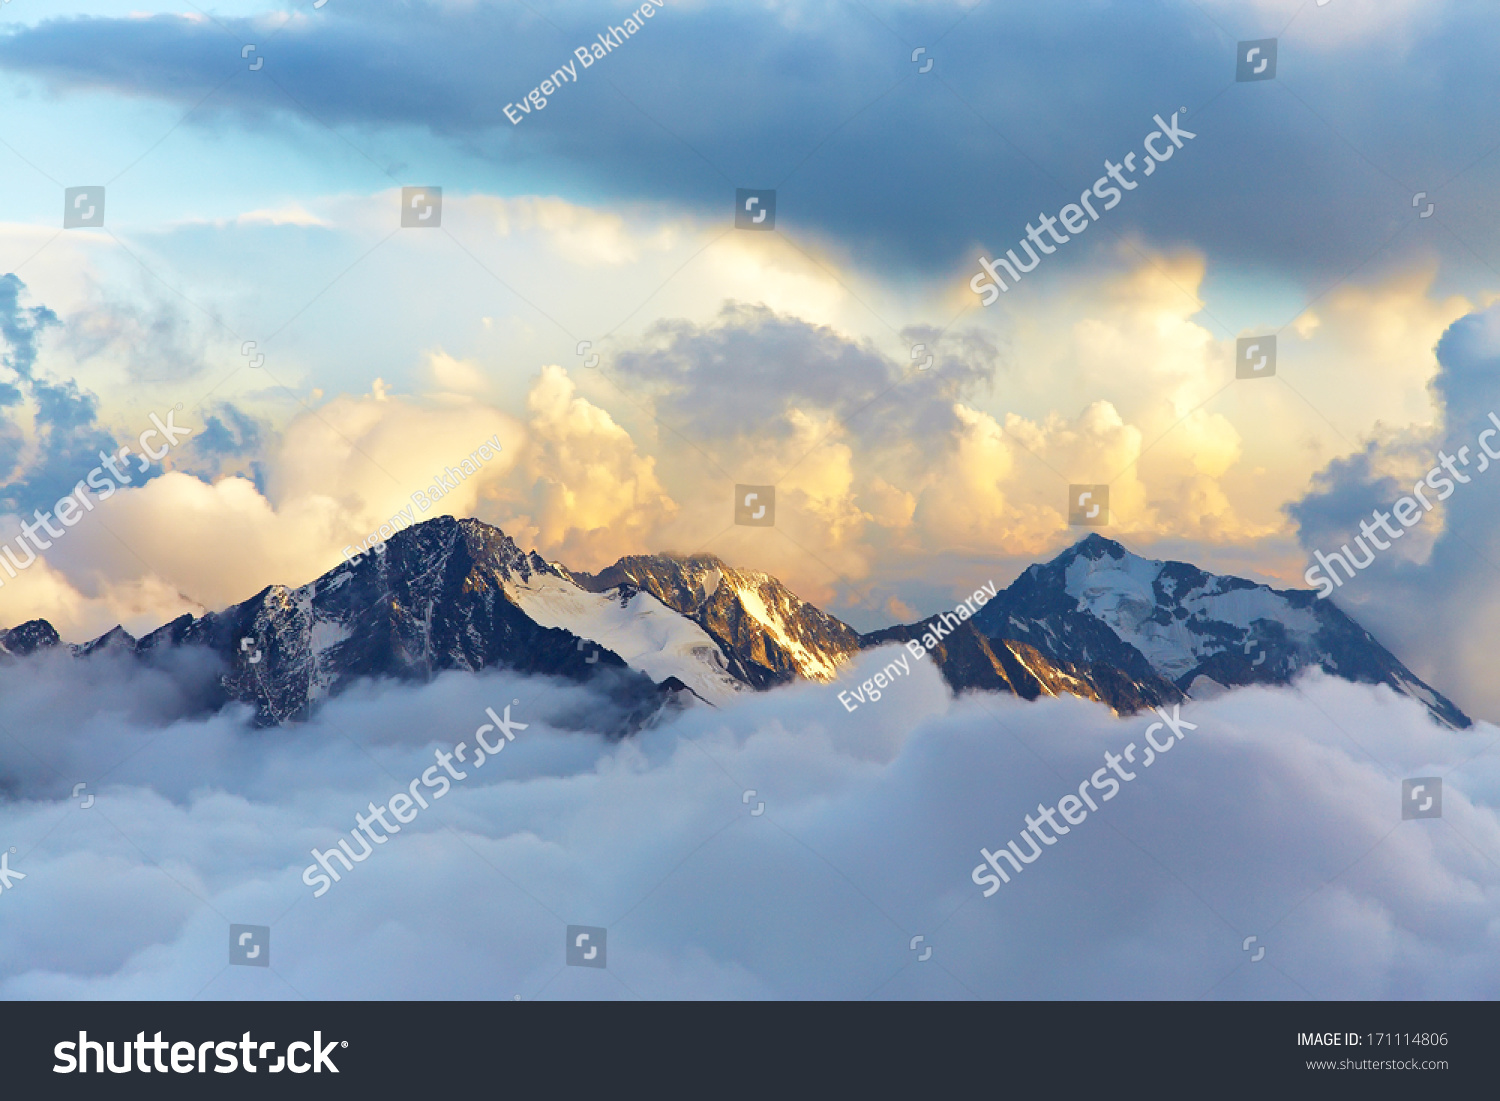 alpine landscape with peaks covered by snow and clouds #171114806